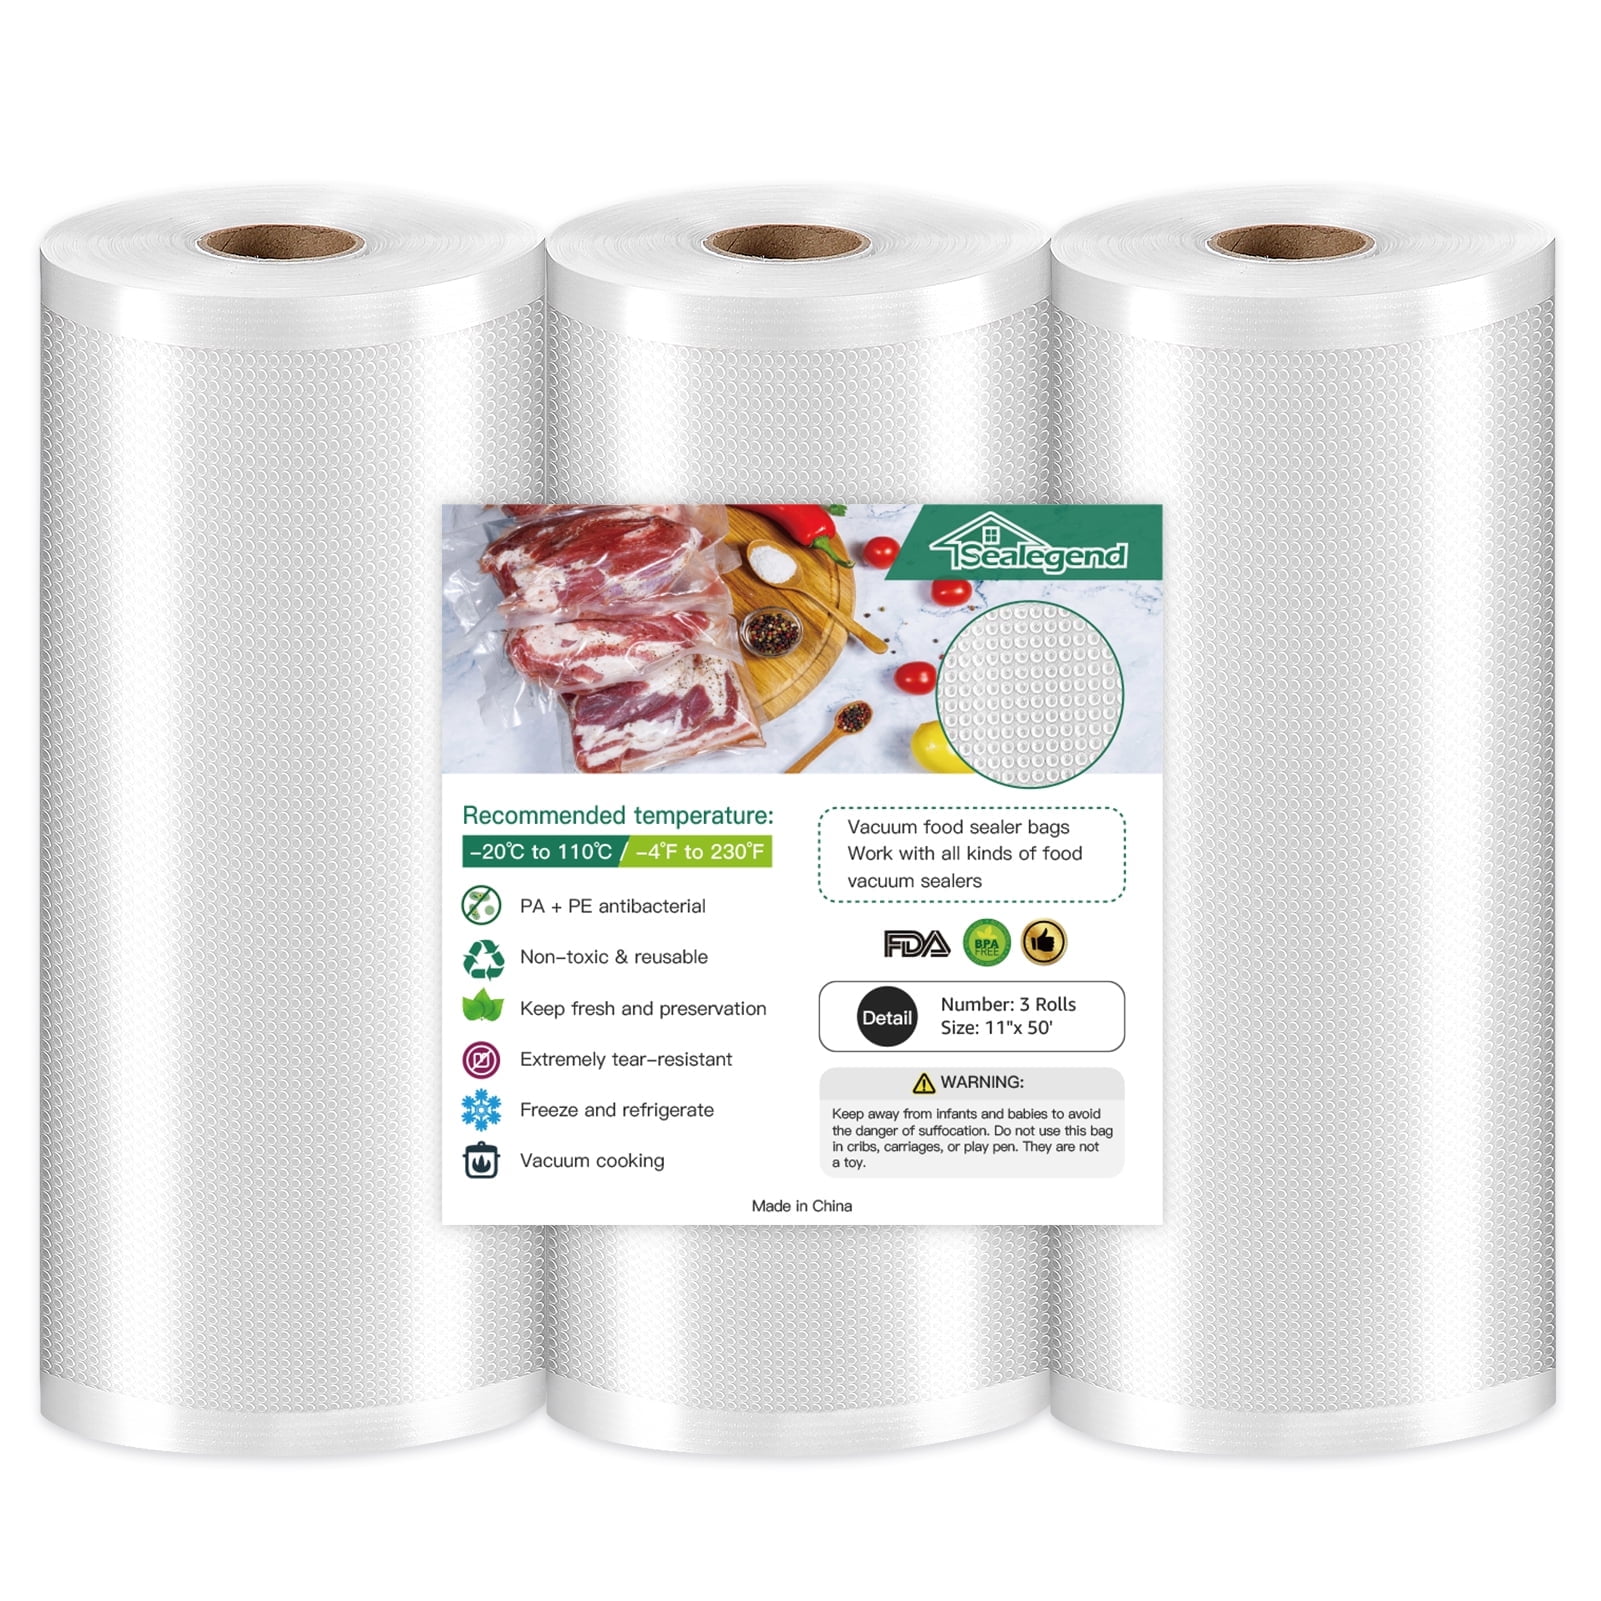 Sealegend 8x 16' & 11x 16' 2 Rolls Vacuum Sealer Bags For Food Saver, Food  Saver Storage Bags,Vacuum Seal a Meal Bags for Food 